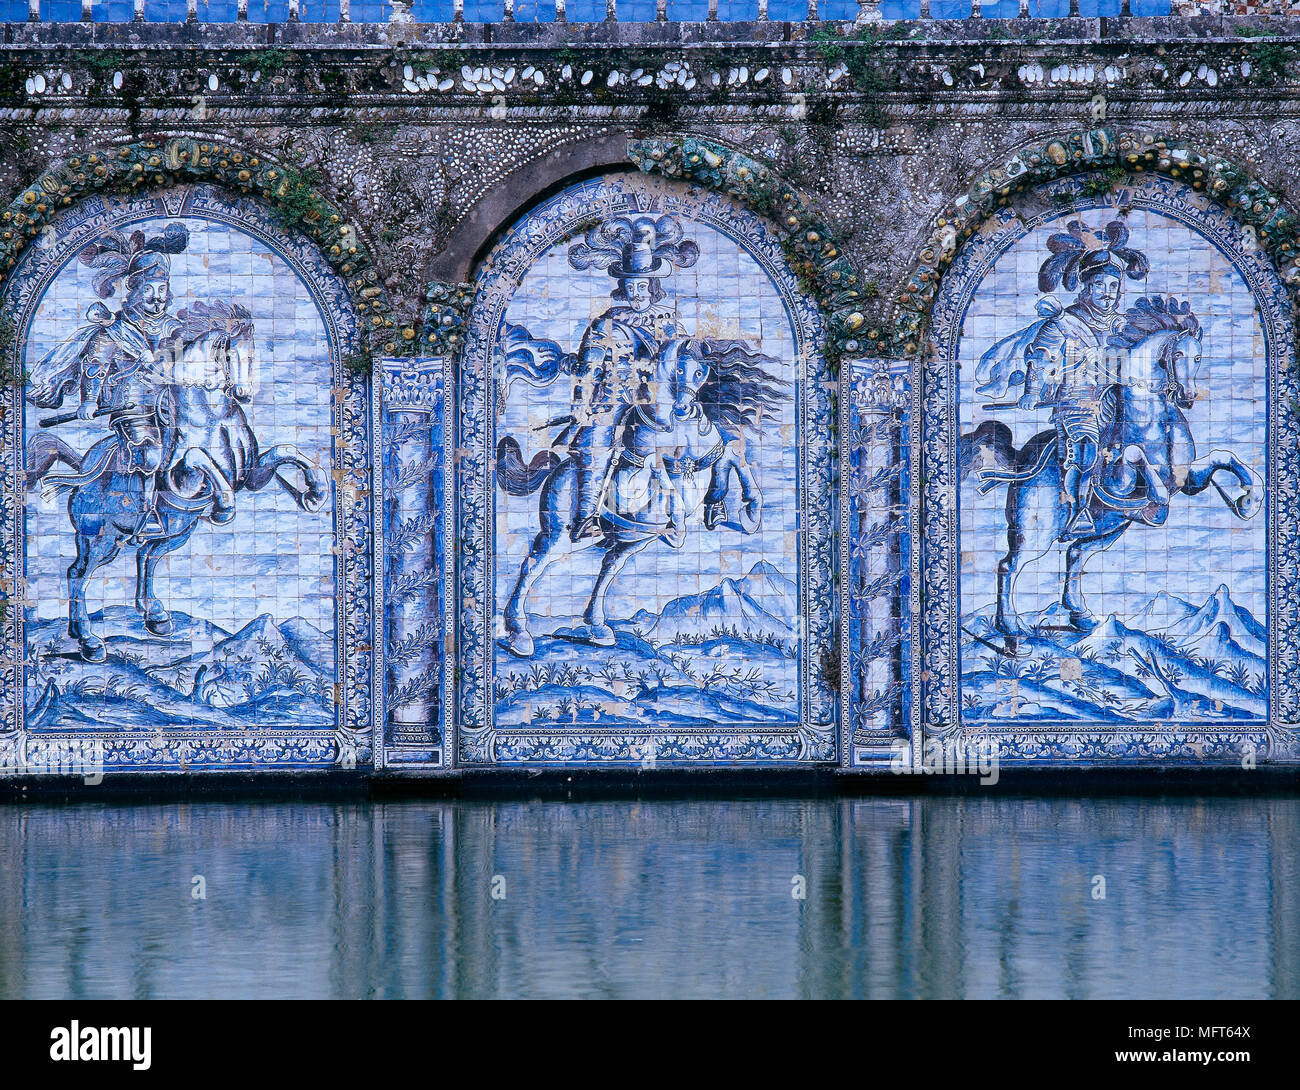 Exterior of tiled mural walls above surface of lake Stock Photo